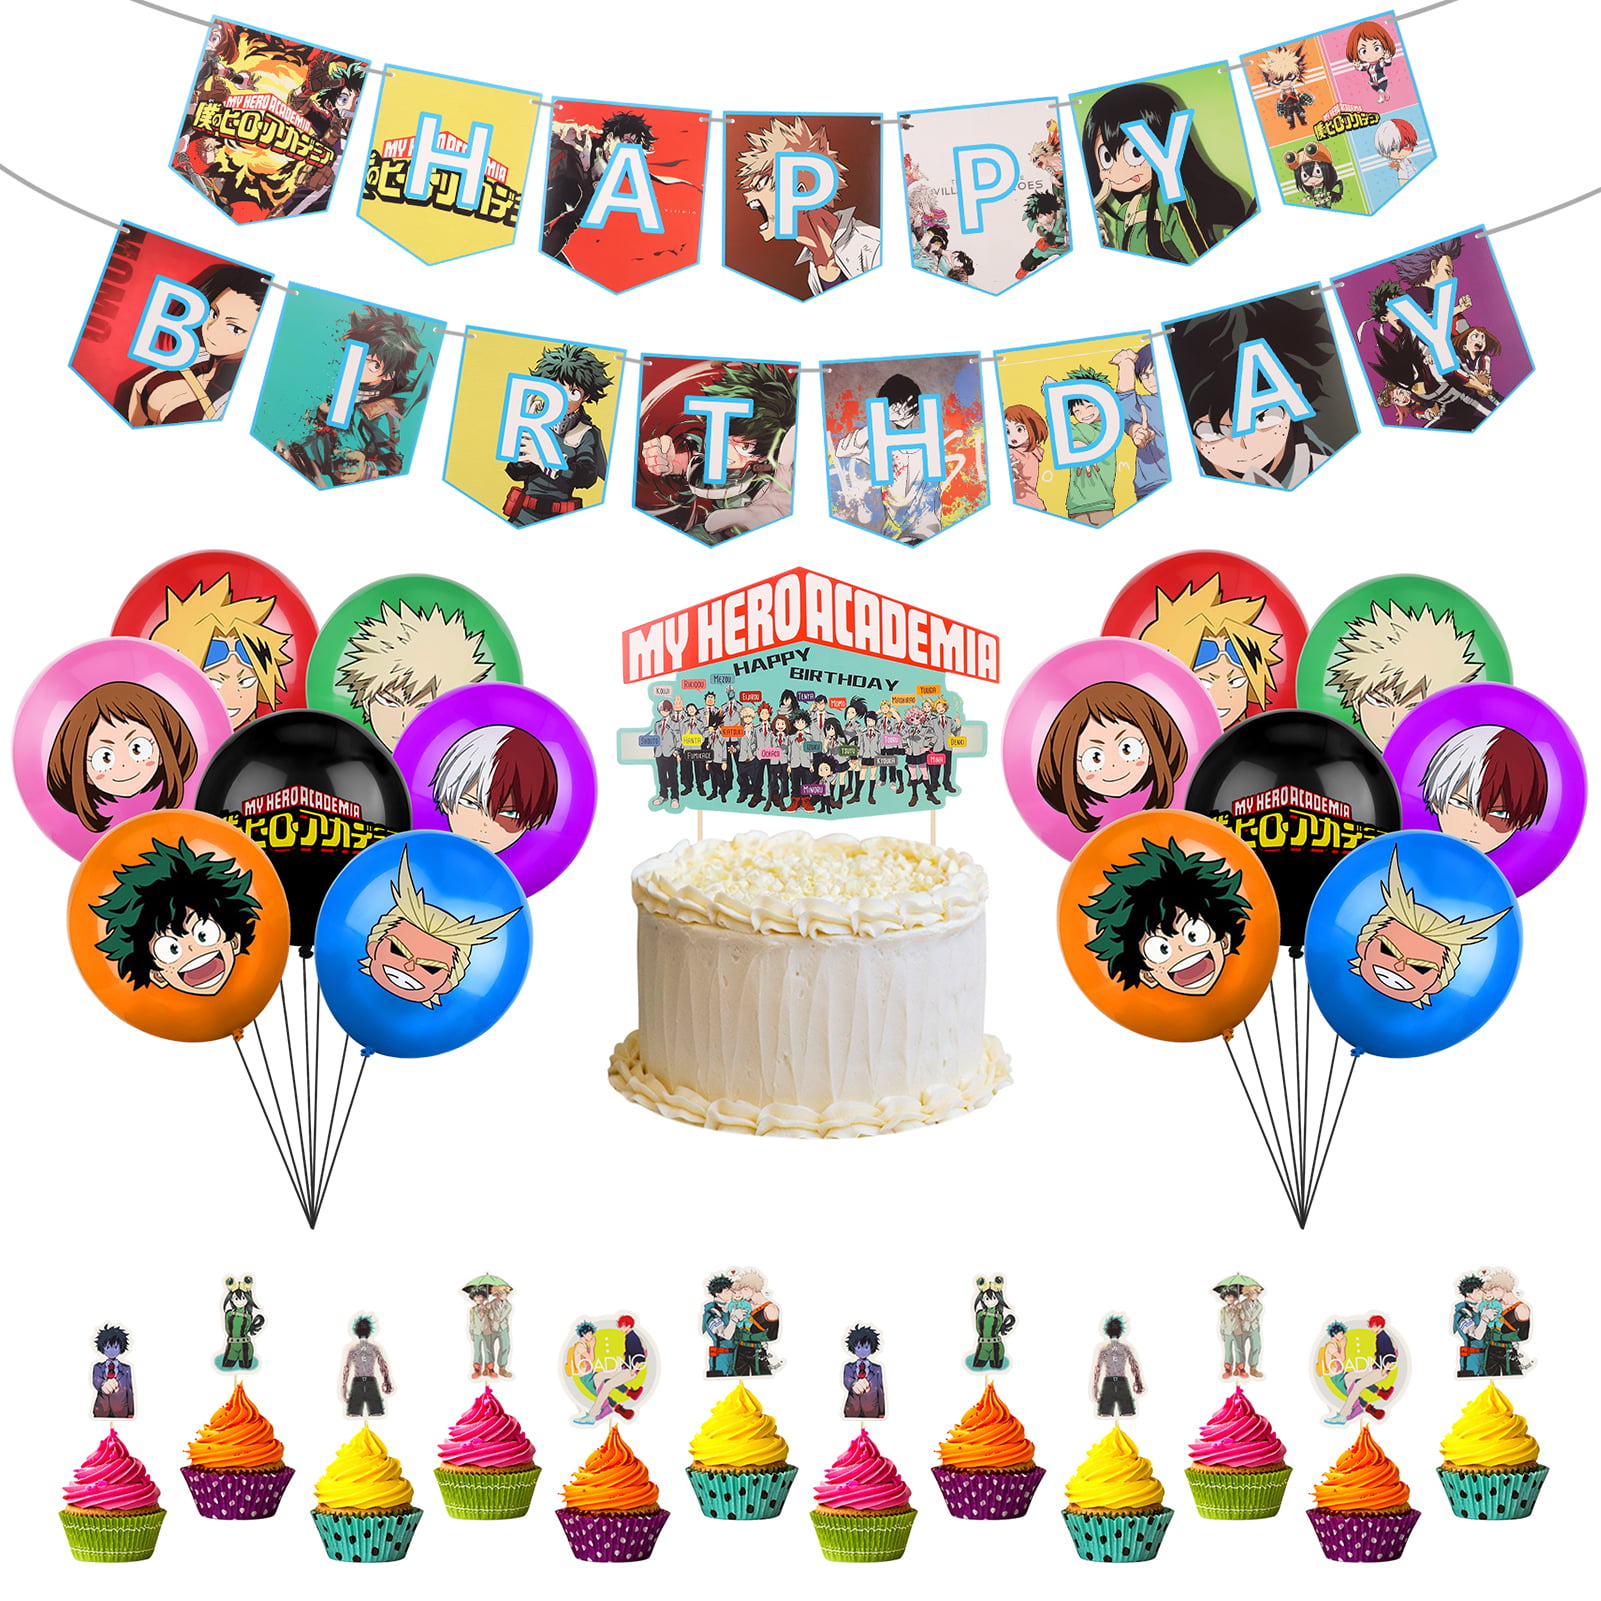 Gaming Theme Party Decorations Includes Happy Birthday Banner Video Game Birthday Party Supplies for Game Fans Foil Balloons for Game Party Decoration Cake Toppers,Latex Balloons